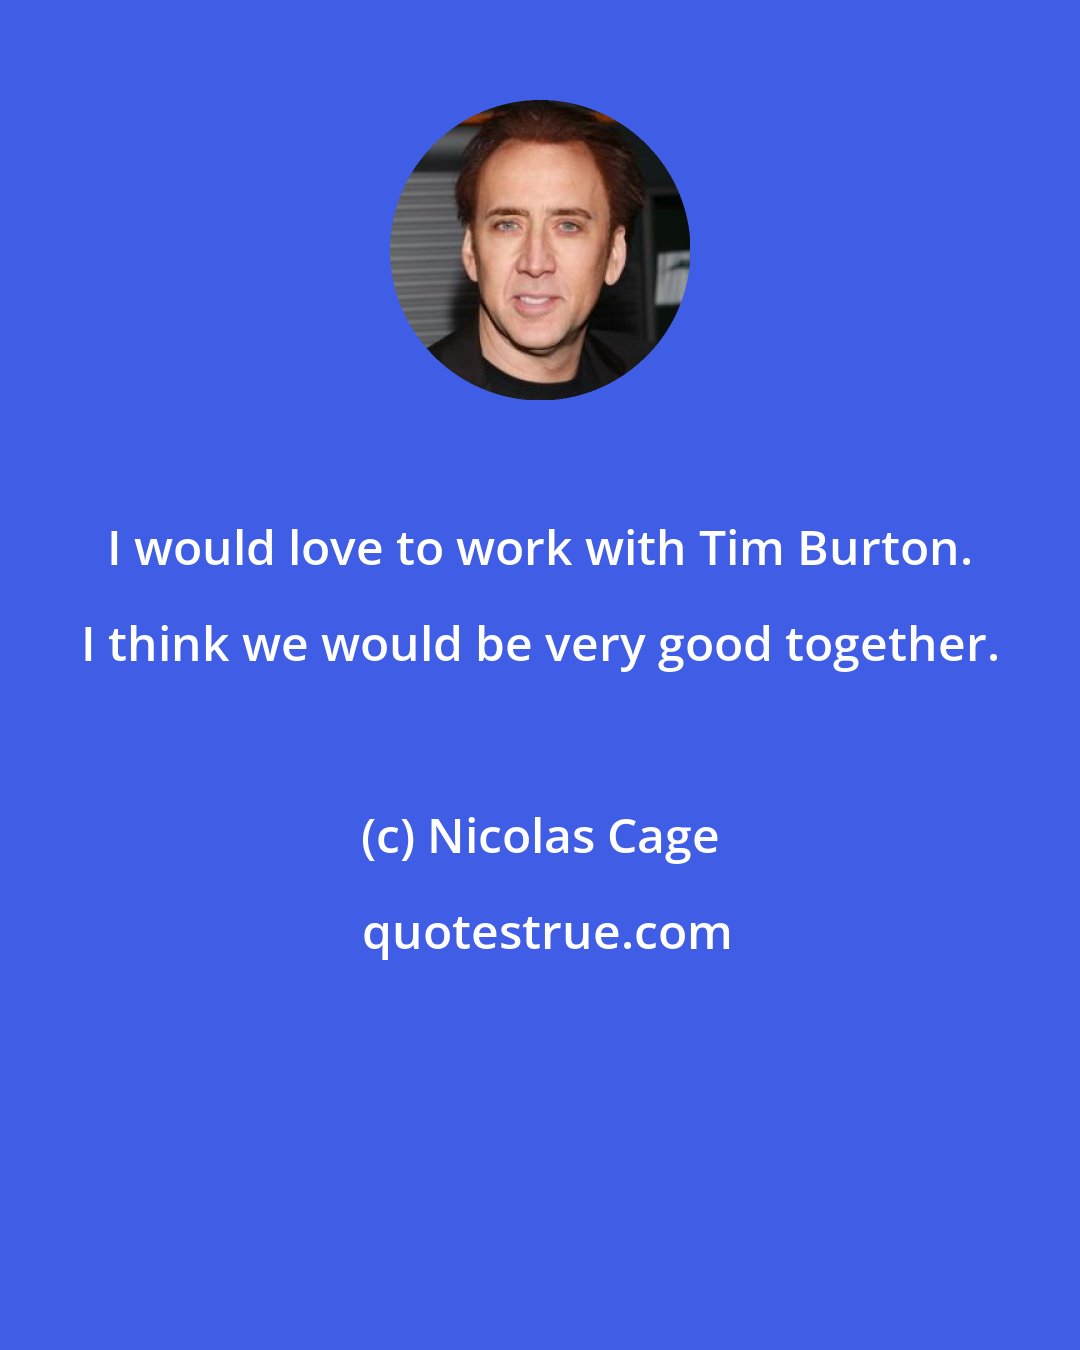 Nicolas Cage: I would love to work with Tim Burton. I think we would be very good together.